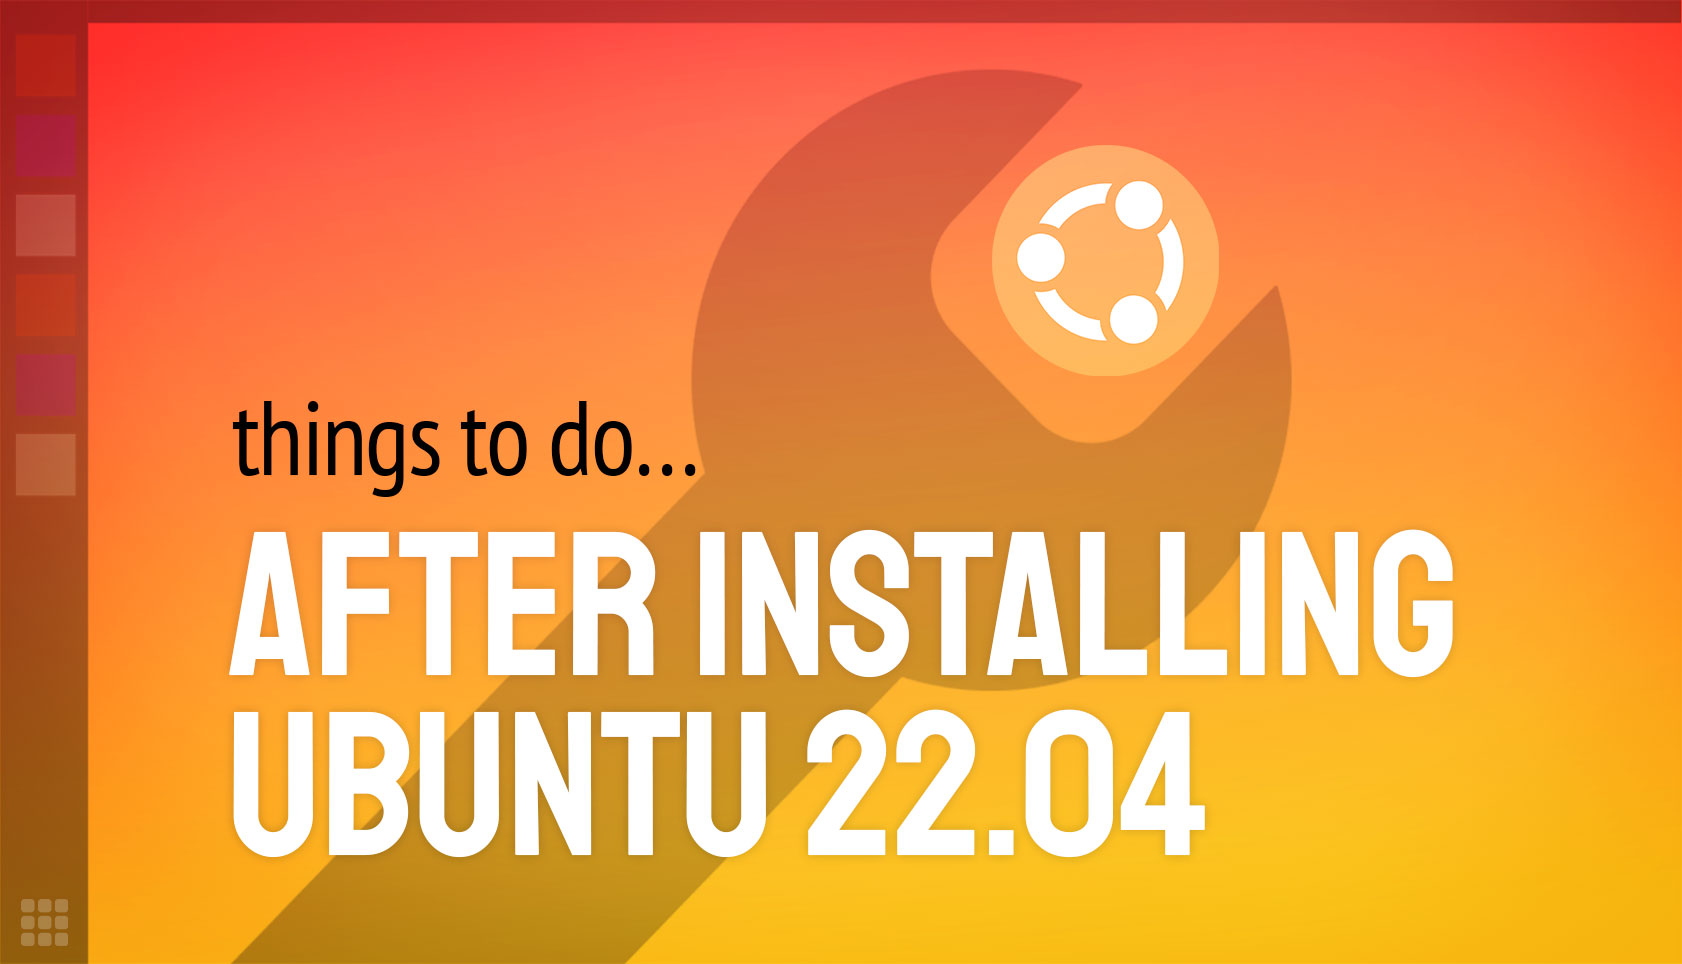 Things to do after installing Ubuntu 22.04 banner